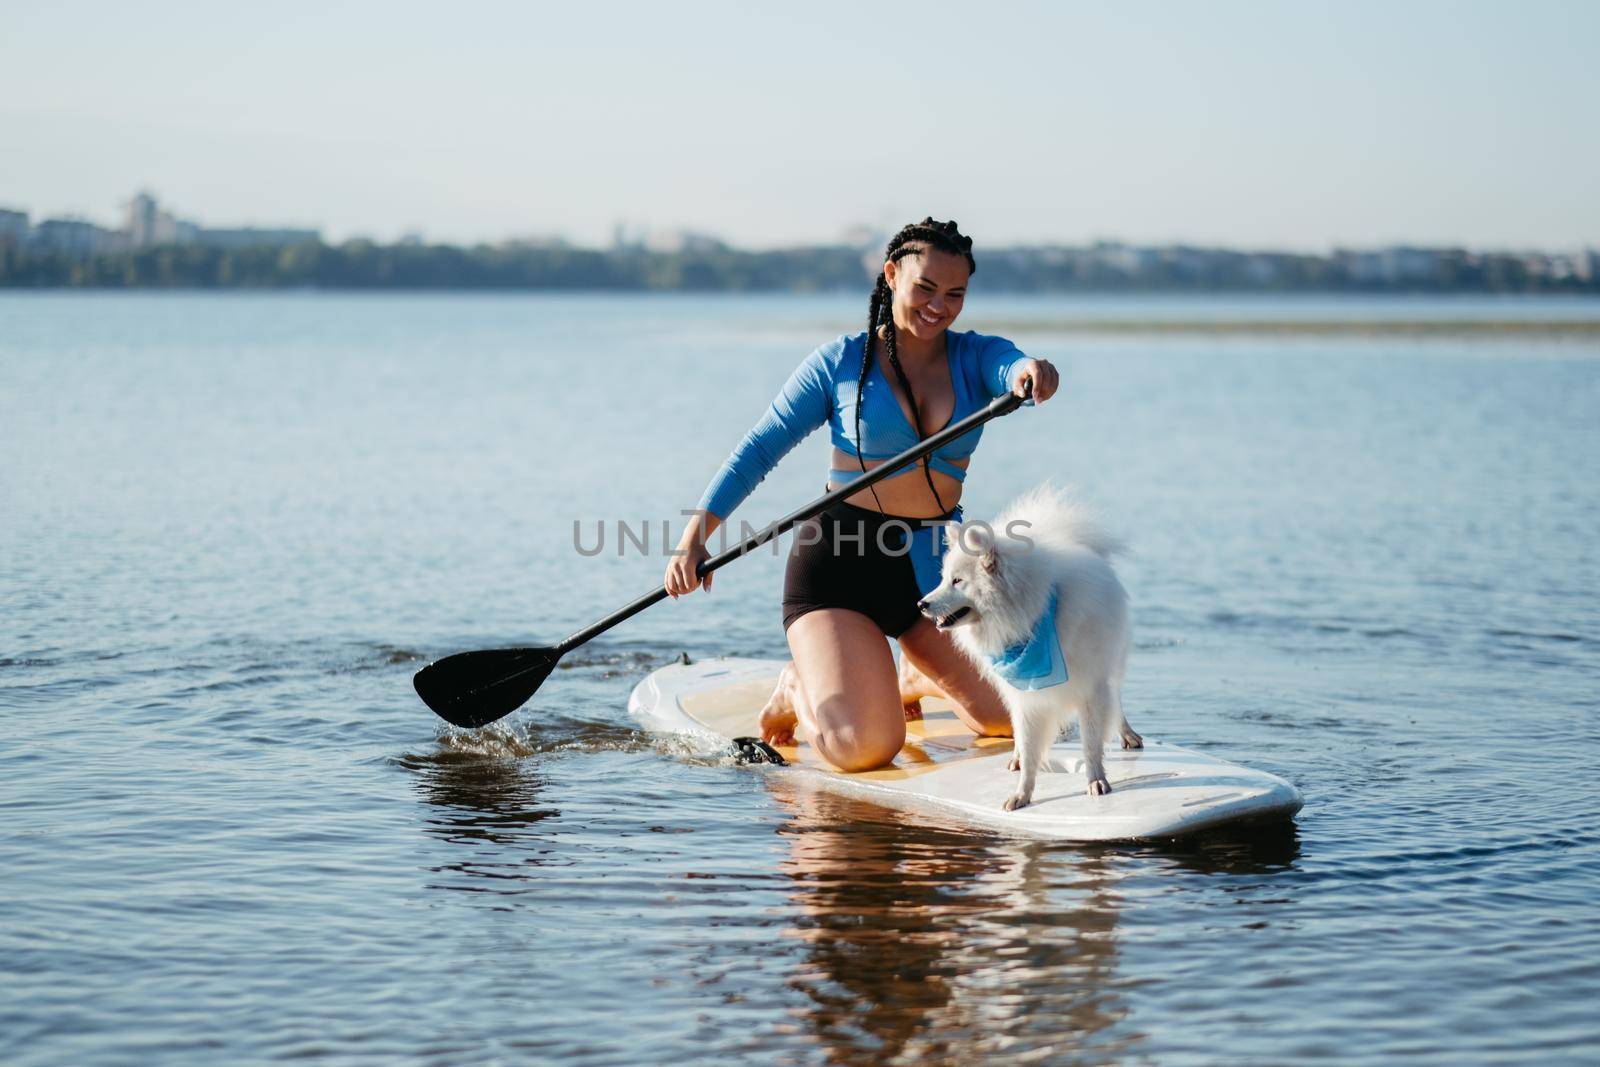 Cheerful Woman with Dreadlocks Paddleboarding with Her Dog Snow-White Japanese Spitz on Sup Board on City Lake